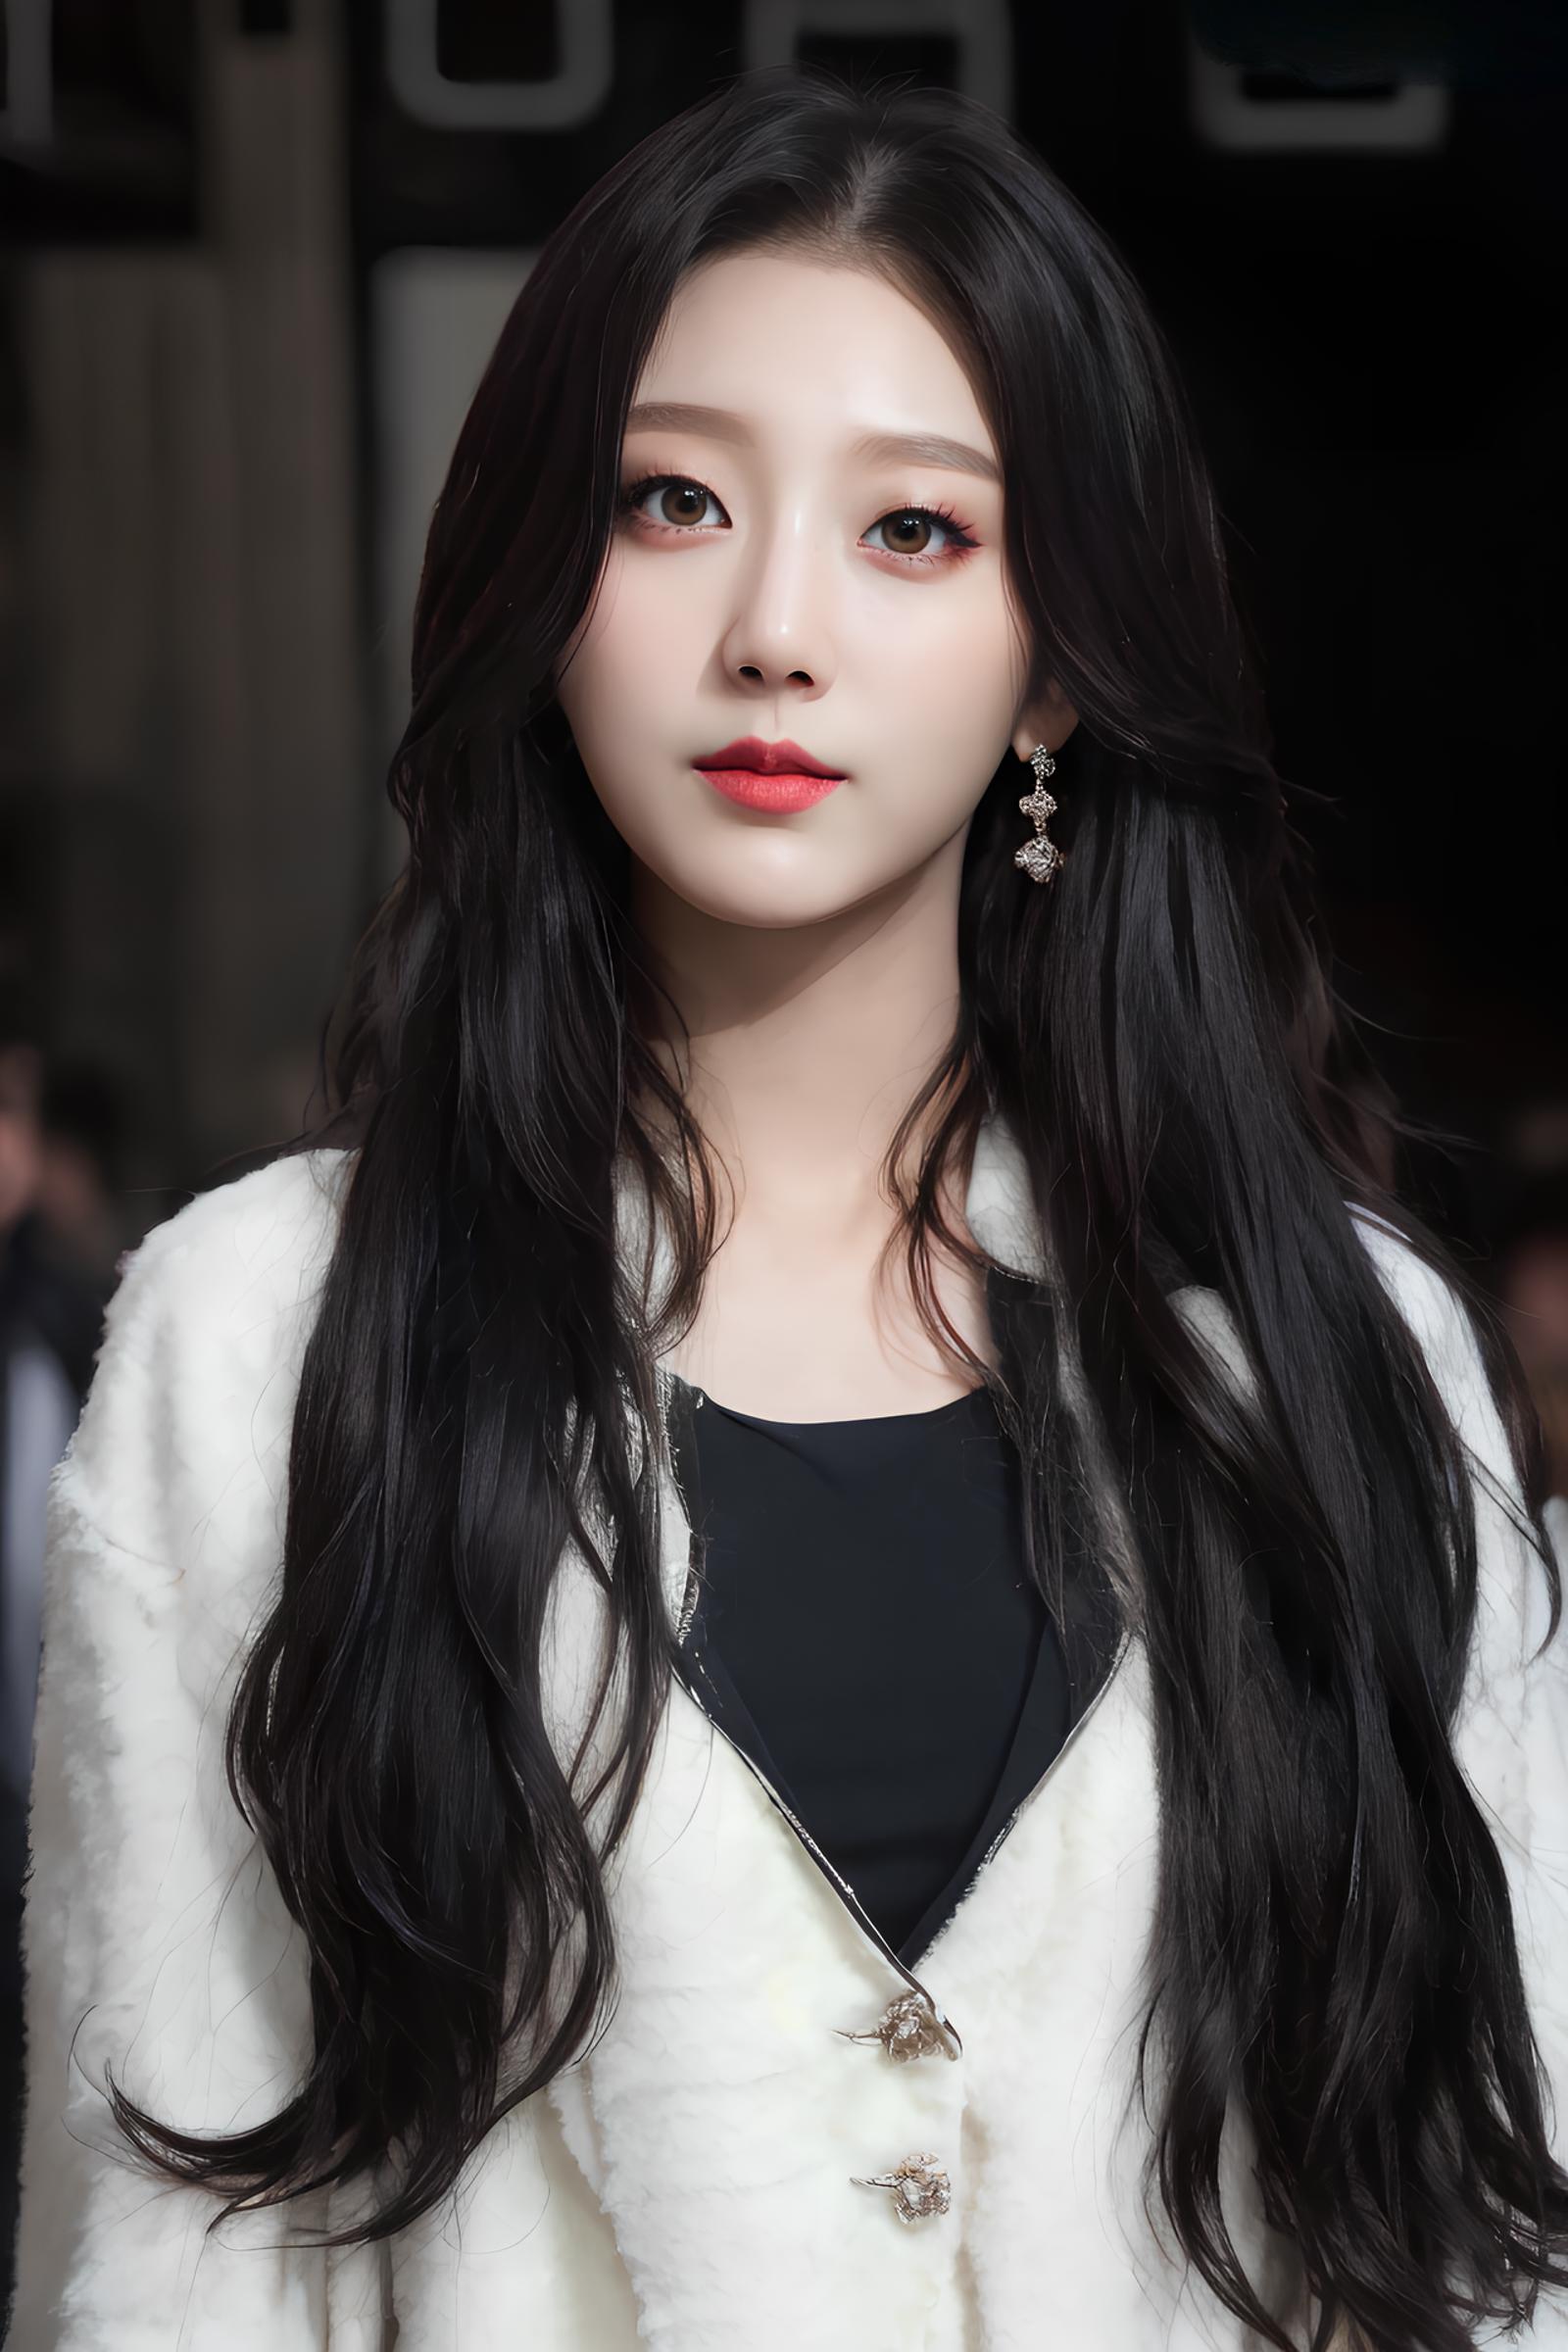 Not Lovelyz - Yein image by Tissue_AI